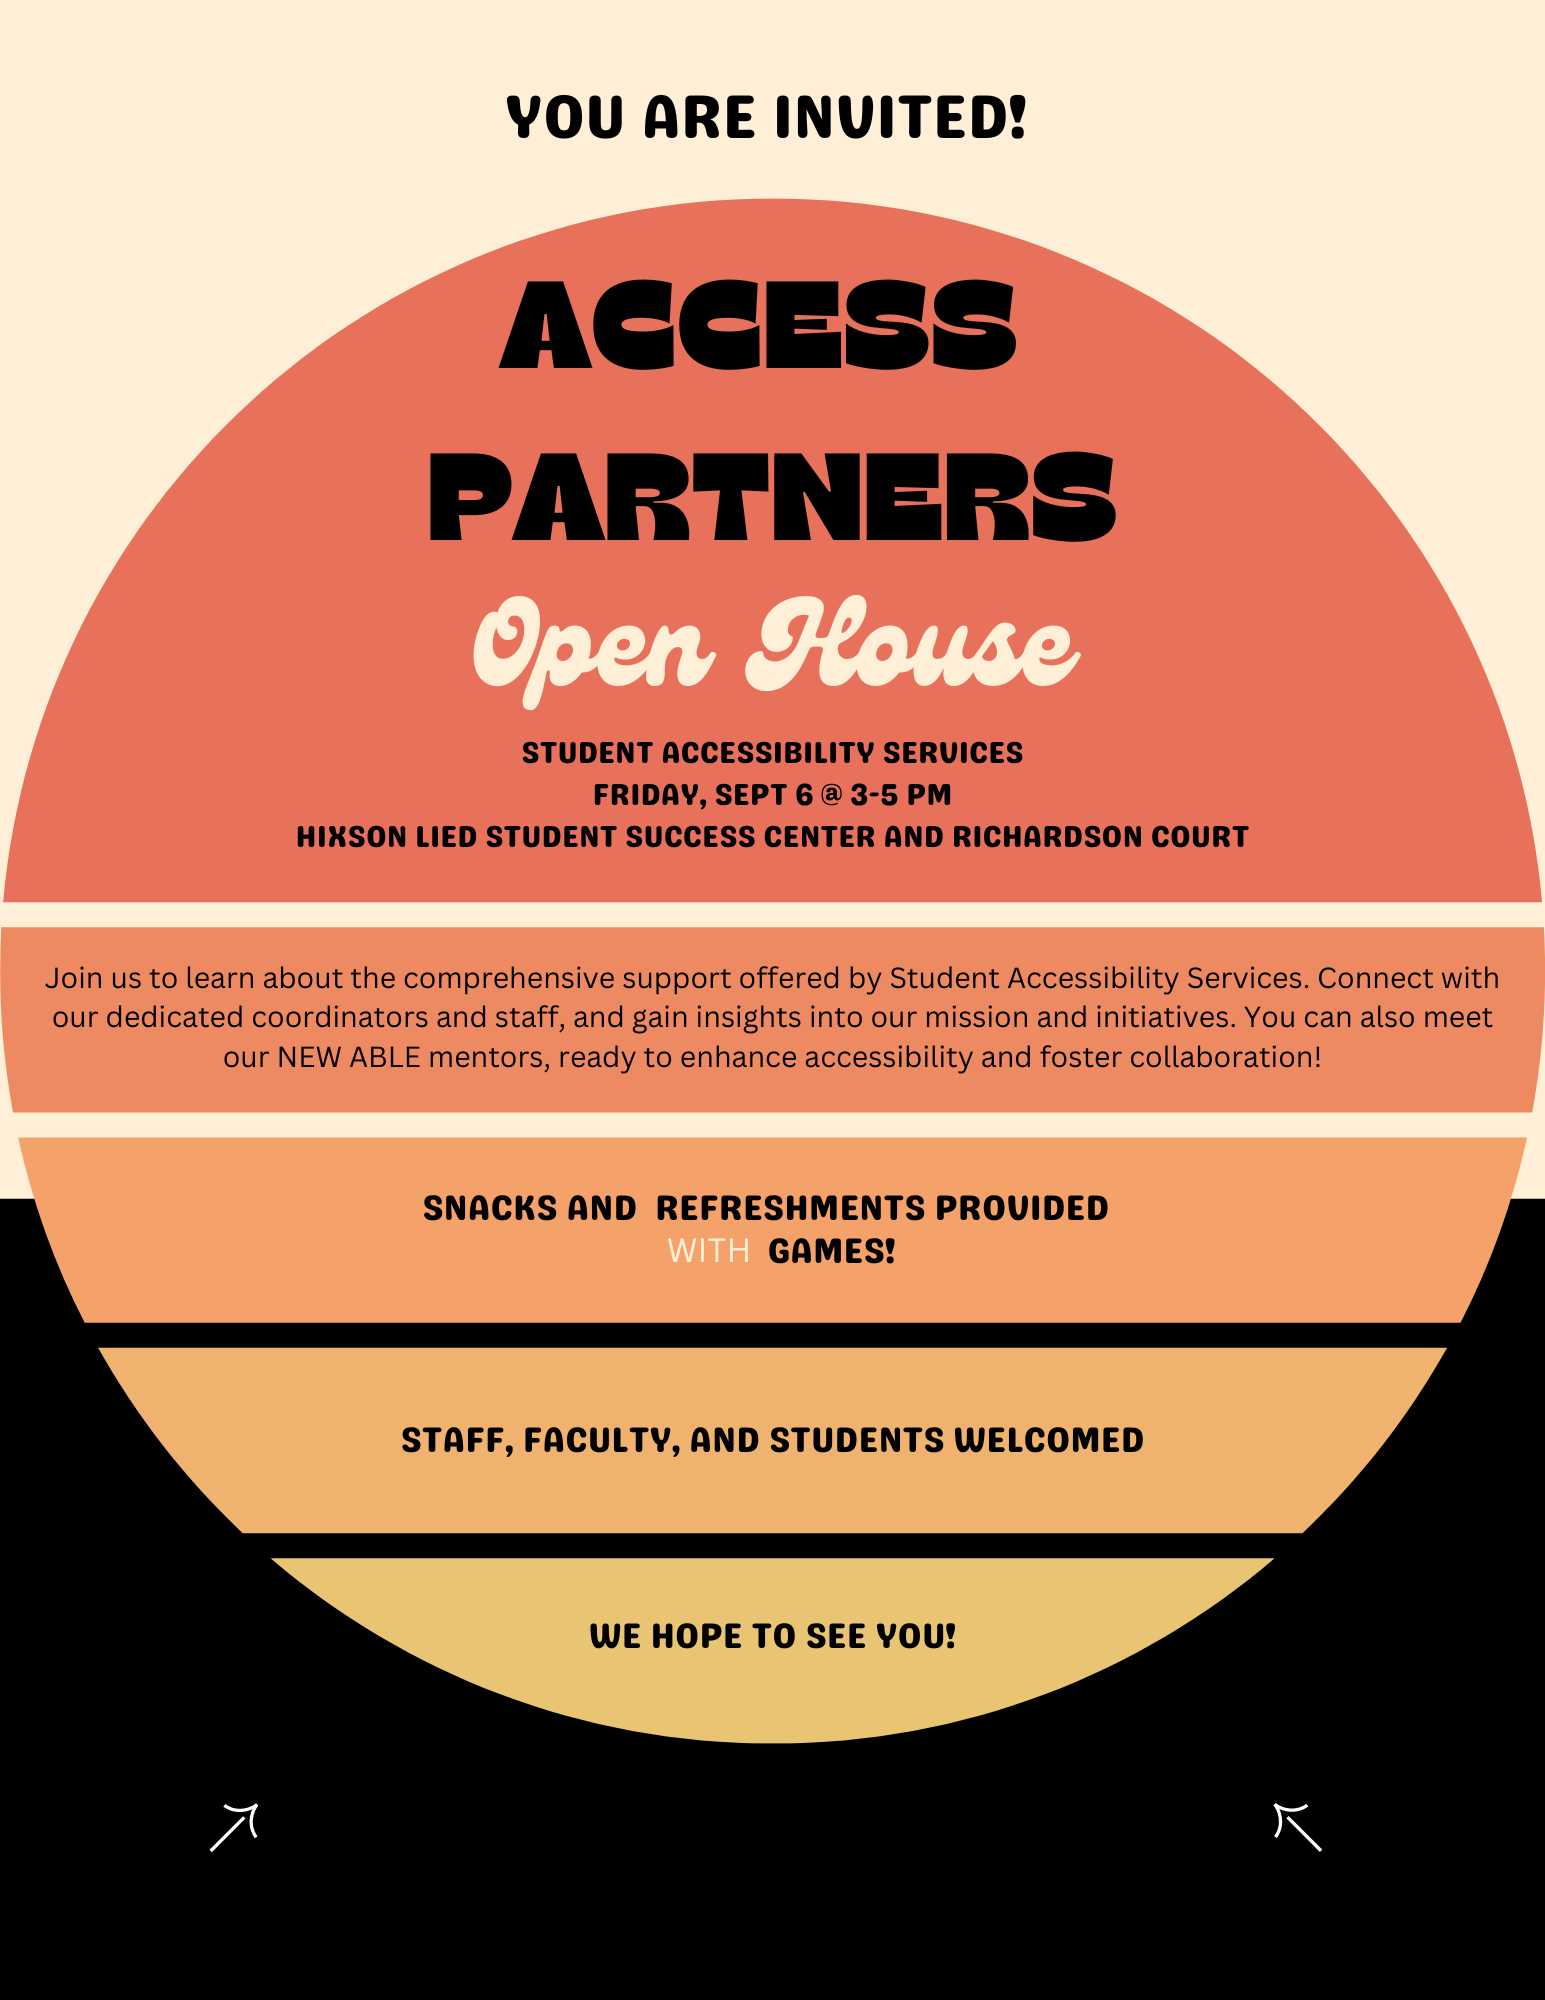 Flyer for SAS Open Housing. Come for free food, drinks, and games. Located in the Hixon-Lied Student Success Center & Richardson Court. Open for Students, Faculty, and Staff. Drop in and meet the team and learn more about what we can offer. September 6th, 2924 from 3:00 pm - 5:00 pm